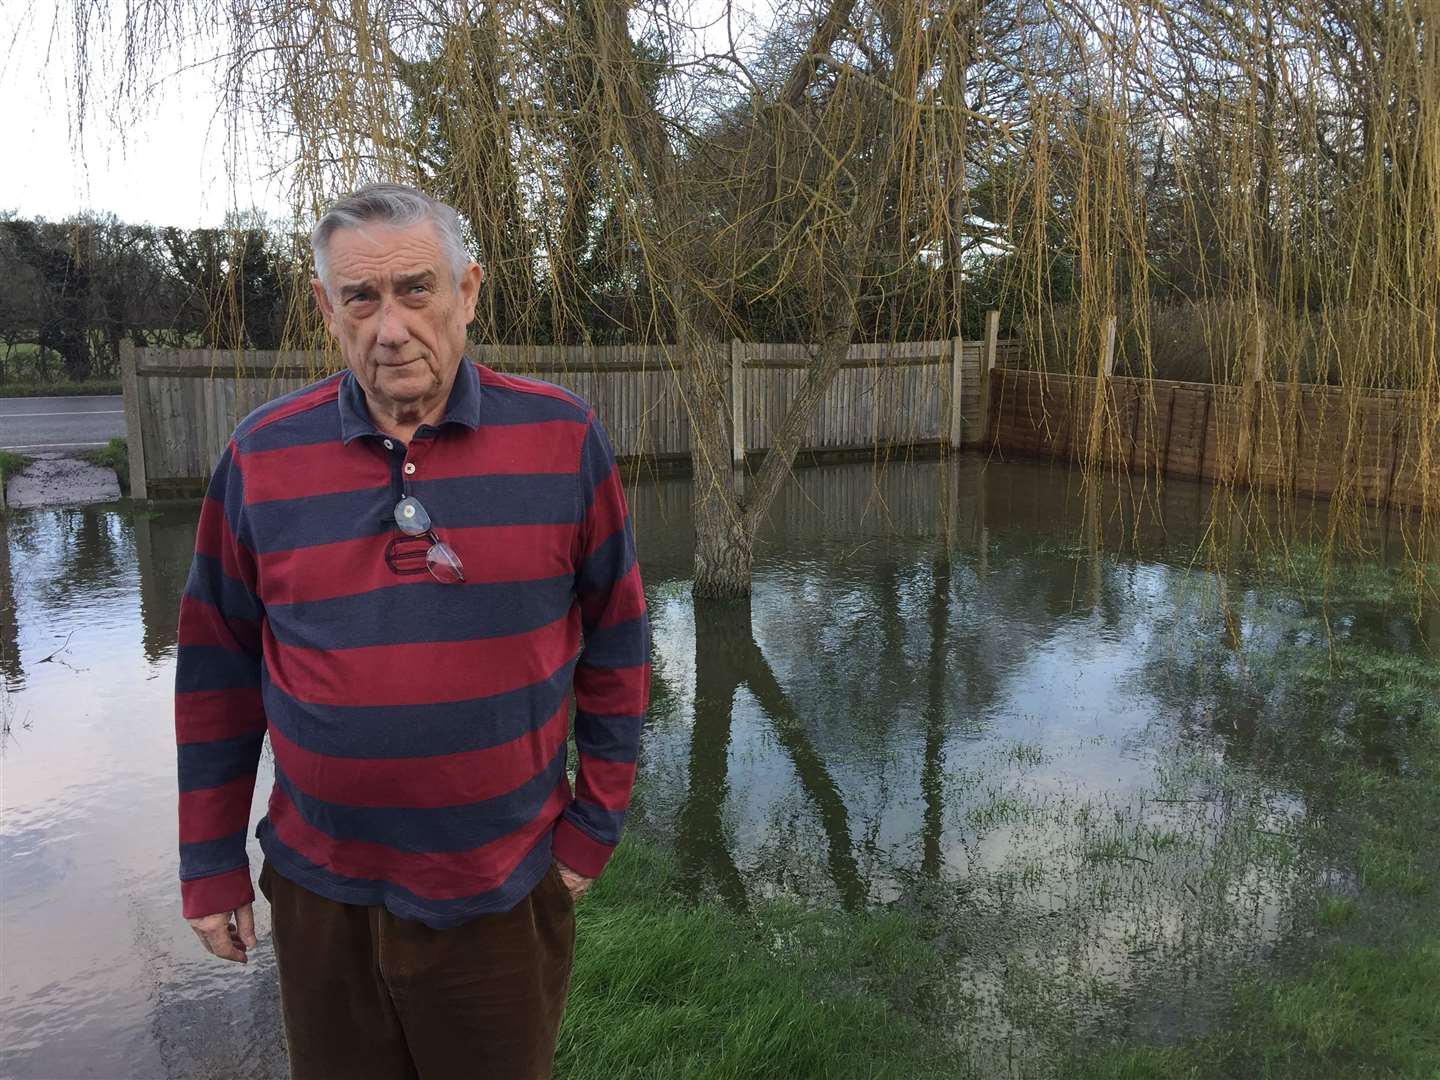 Dudley Mallett's home and garden has been repeatedly flooded